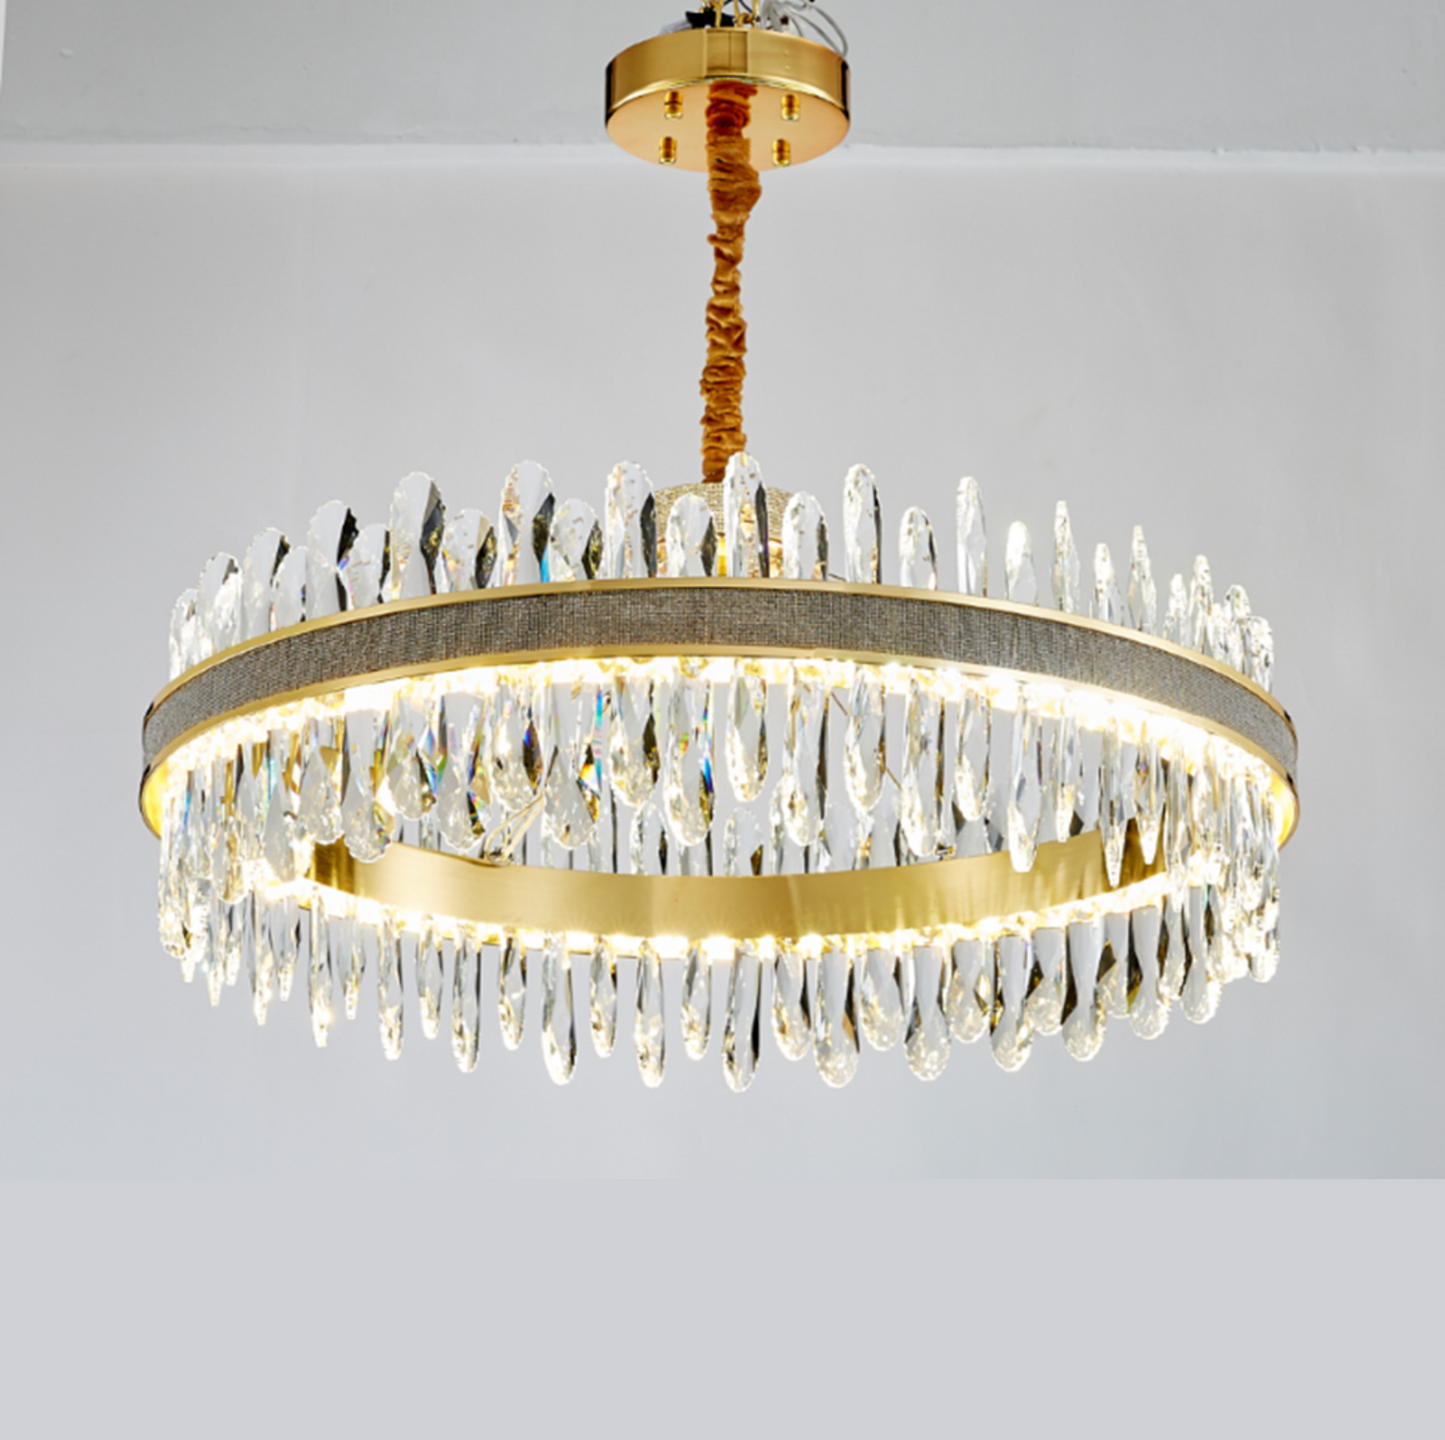 Load image into Gallery viewer, Golden Glow Crystal Chandelier by Gloss (SR2238)
